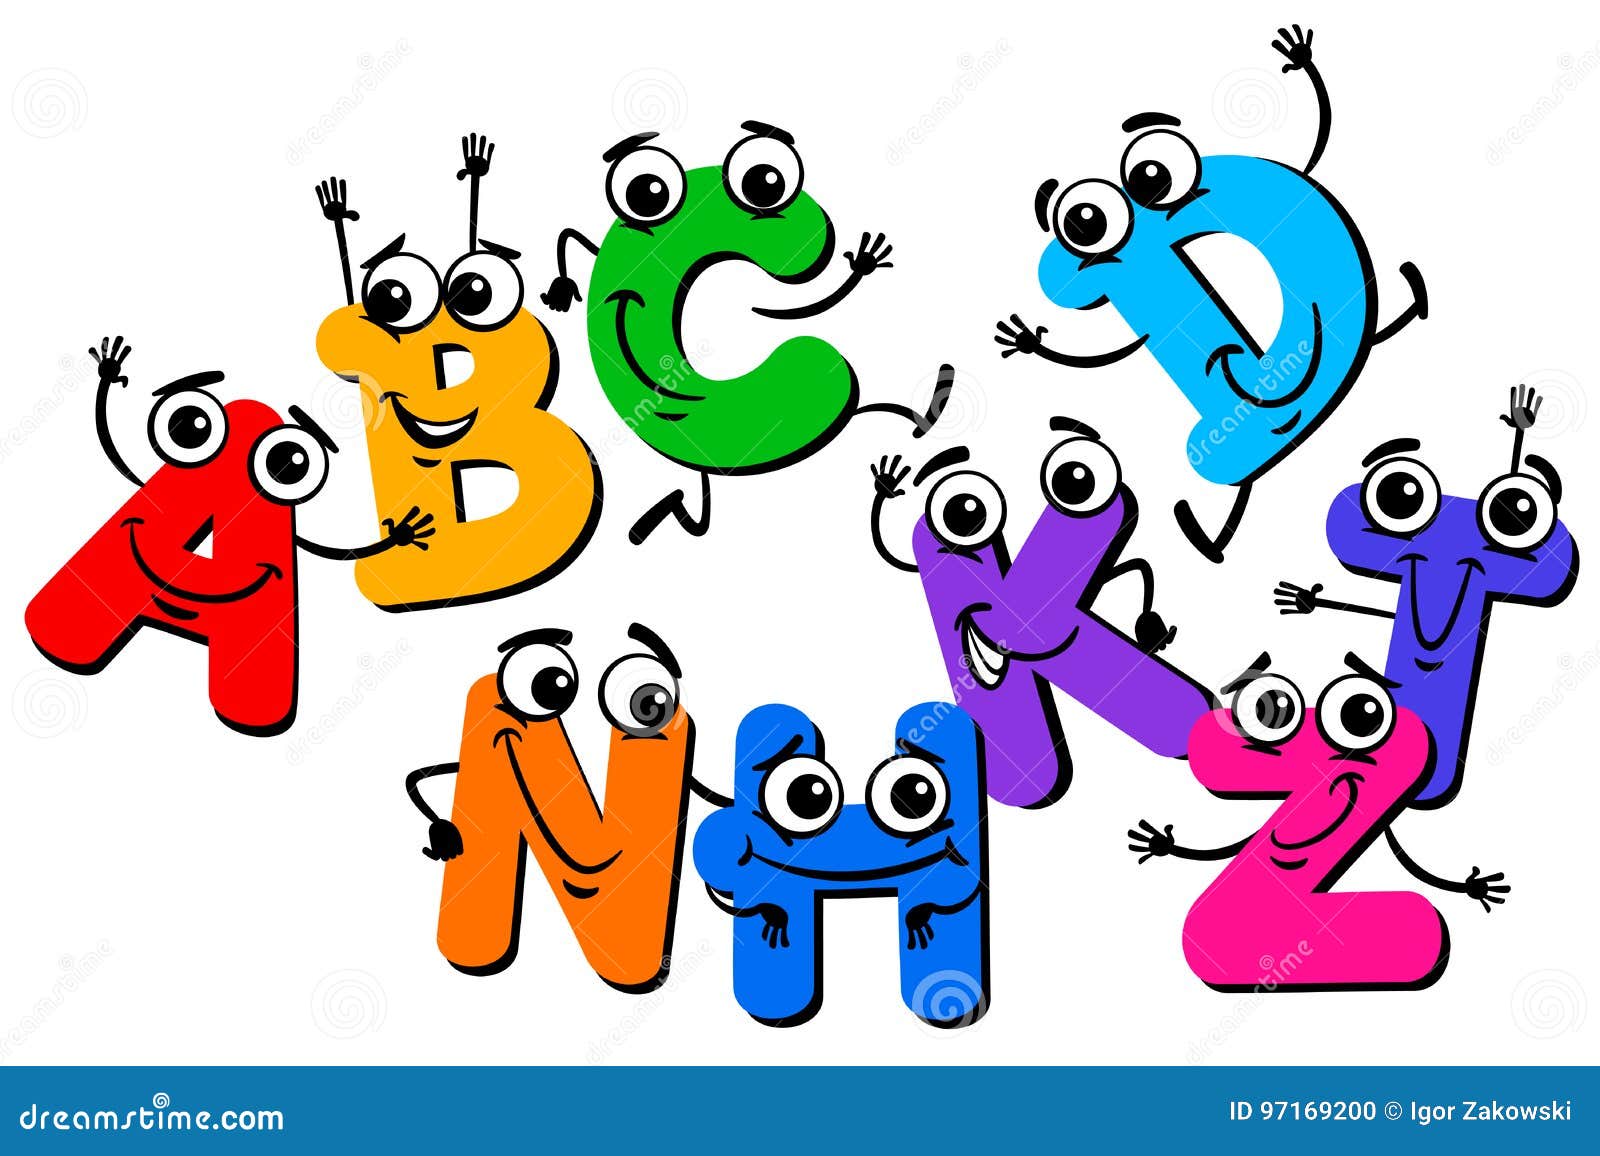 Funny Letter Characters Cartoon Illustration Stock Vector - Illustration of  alphabet, group: 97169200